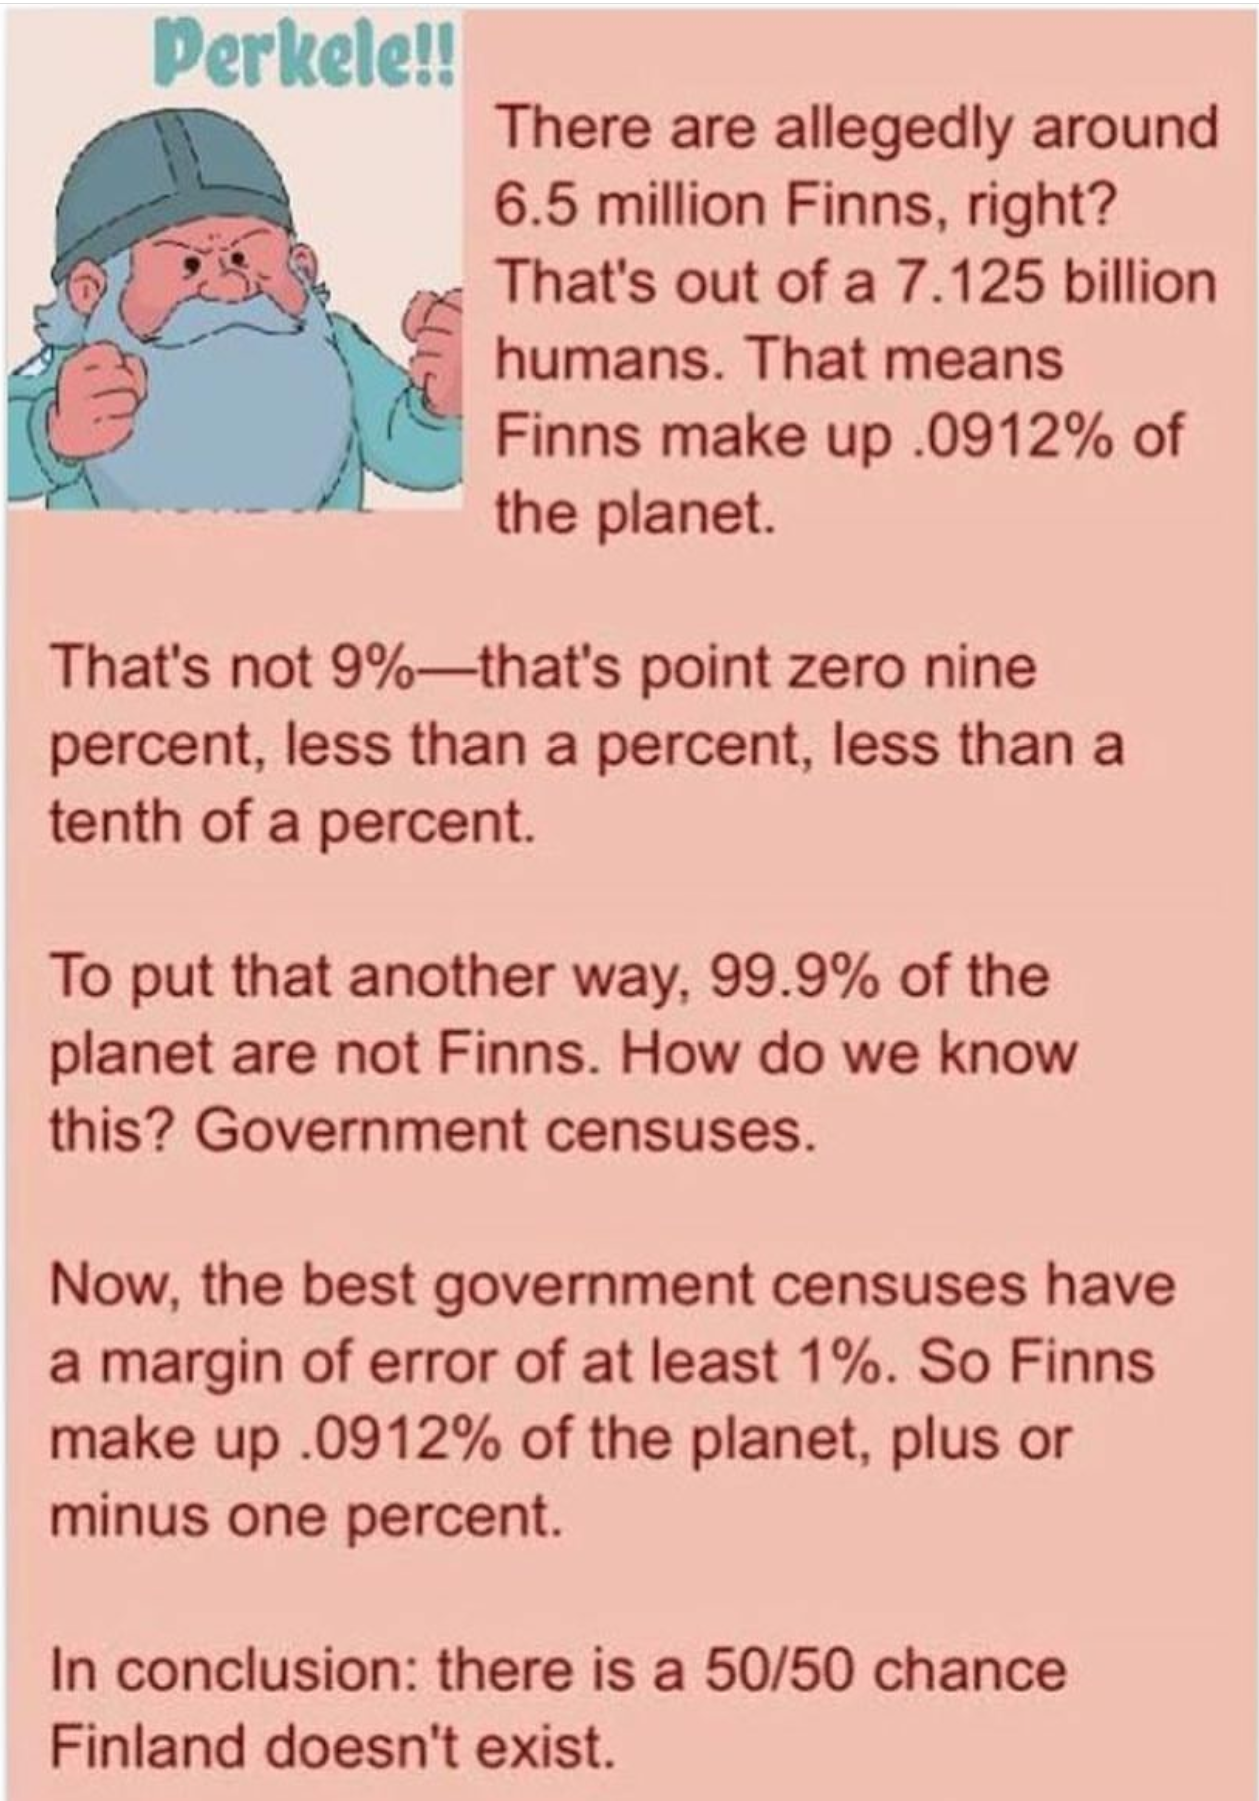 finland might not exist - Perkele!! There are allegedly around 6.5 million Finns, right? That's out of a 7.125 billion humans. That means Finns make up .0912% of the planet. That's not 9%that's point zero nine percent, less than a percent, less than a ten